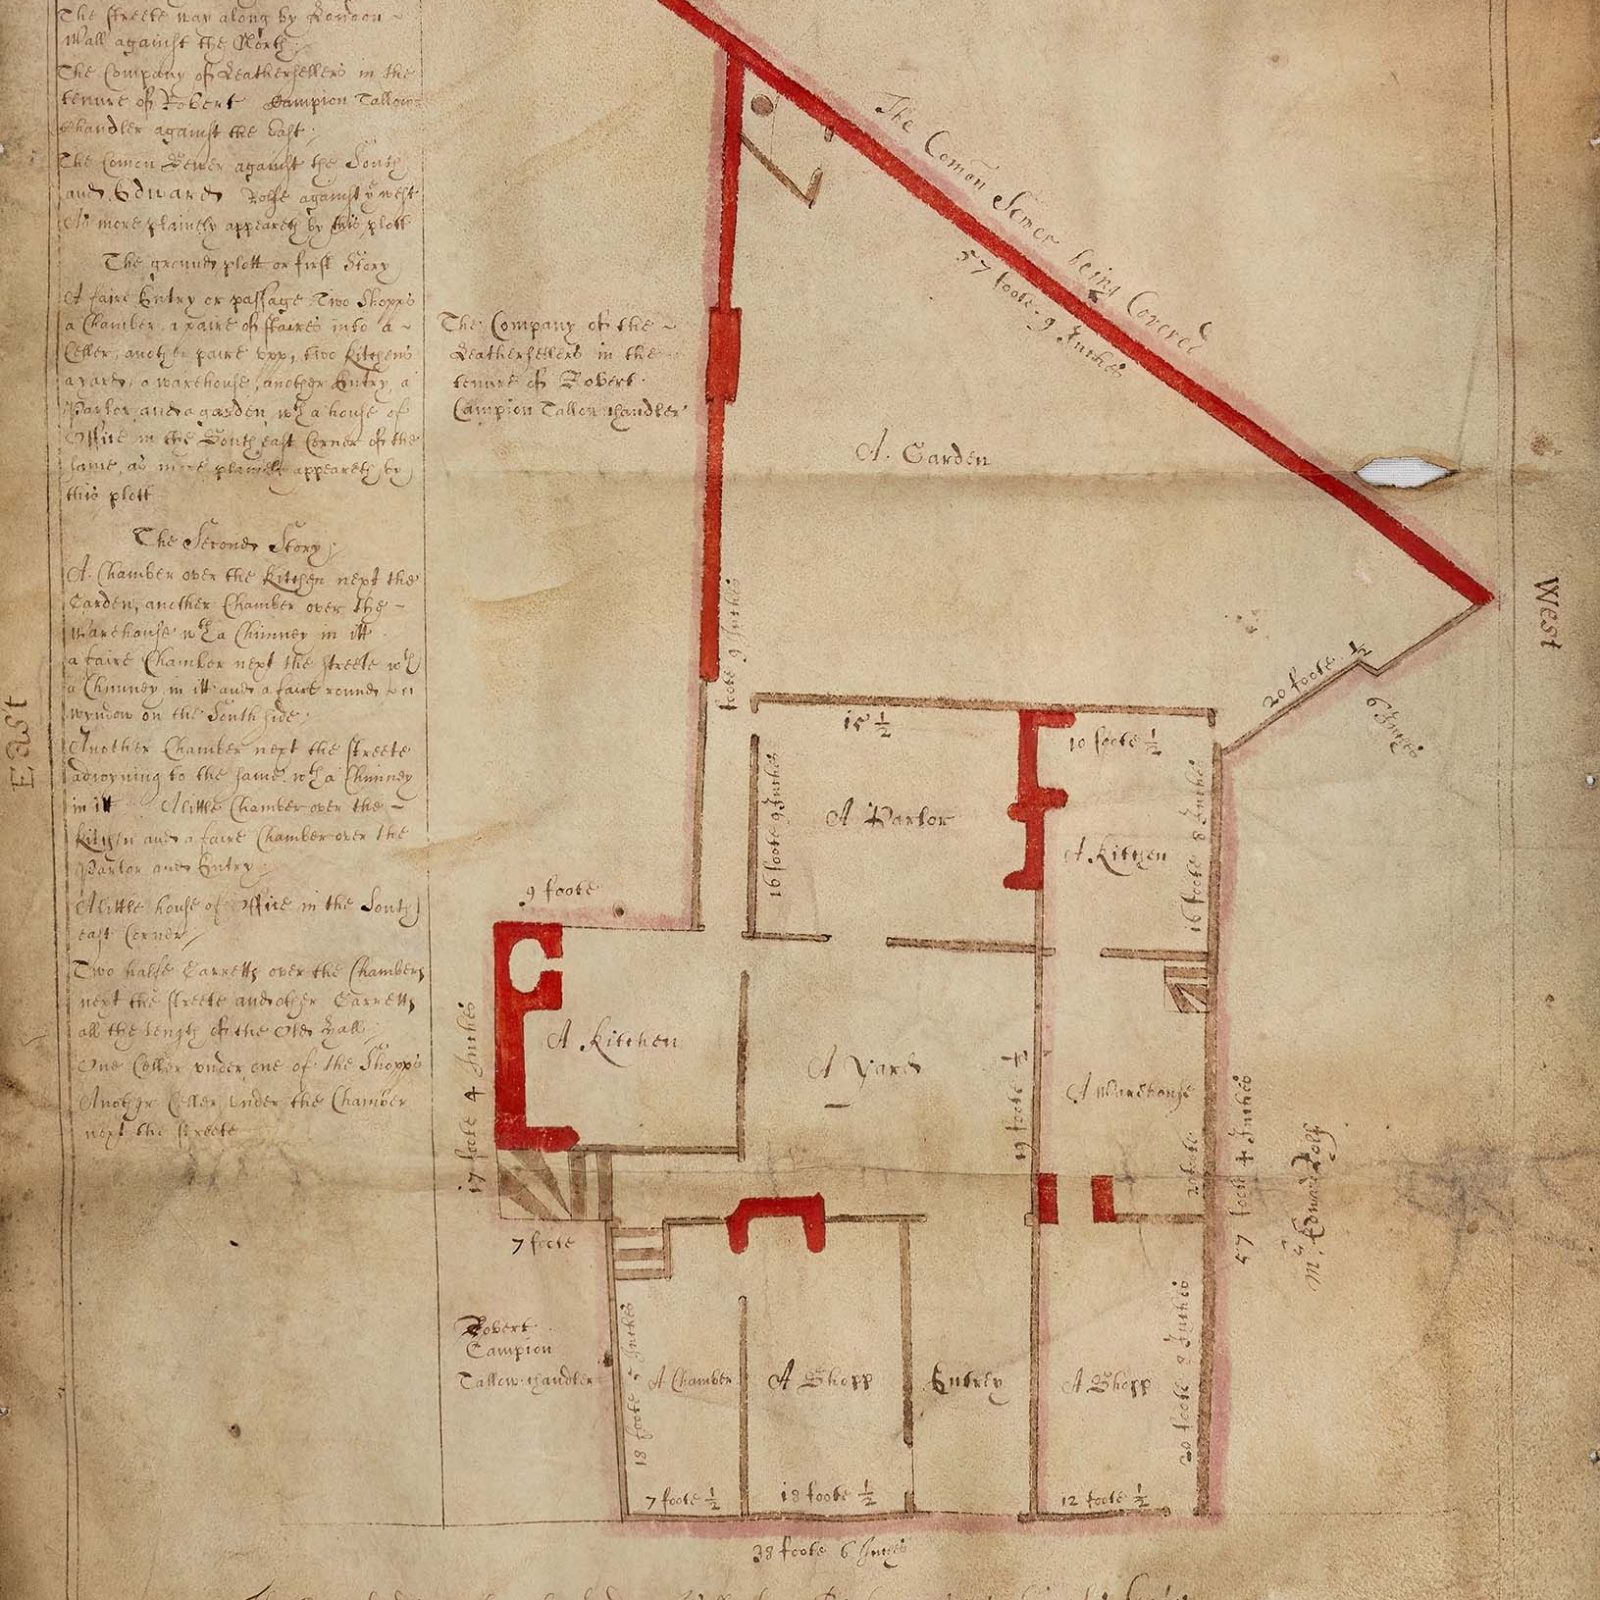 map showing a plan of a building